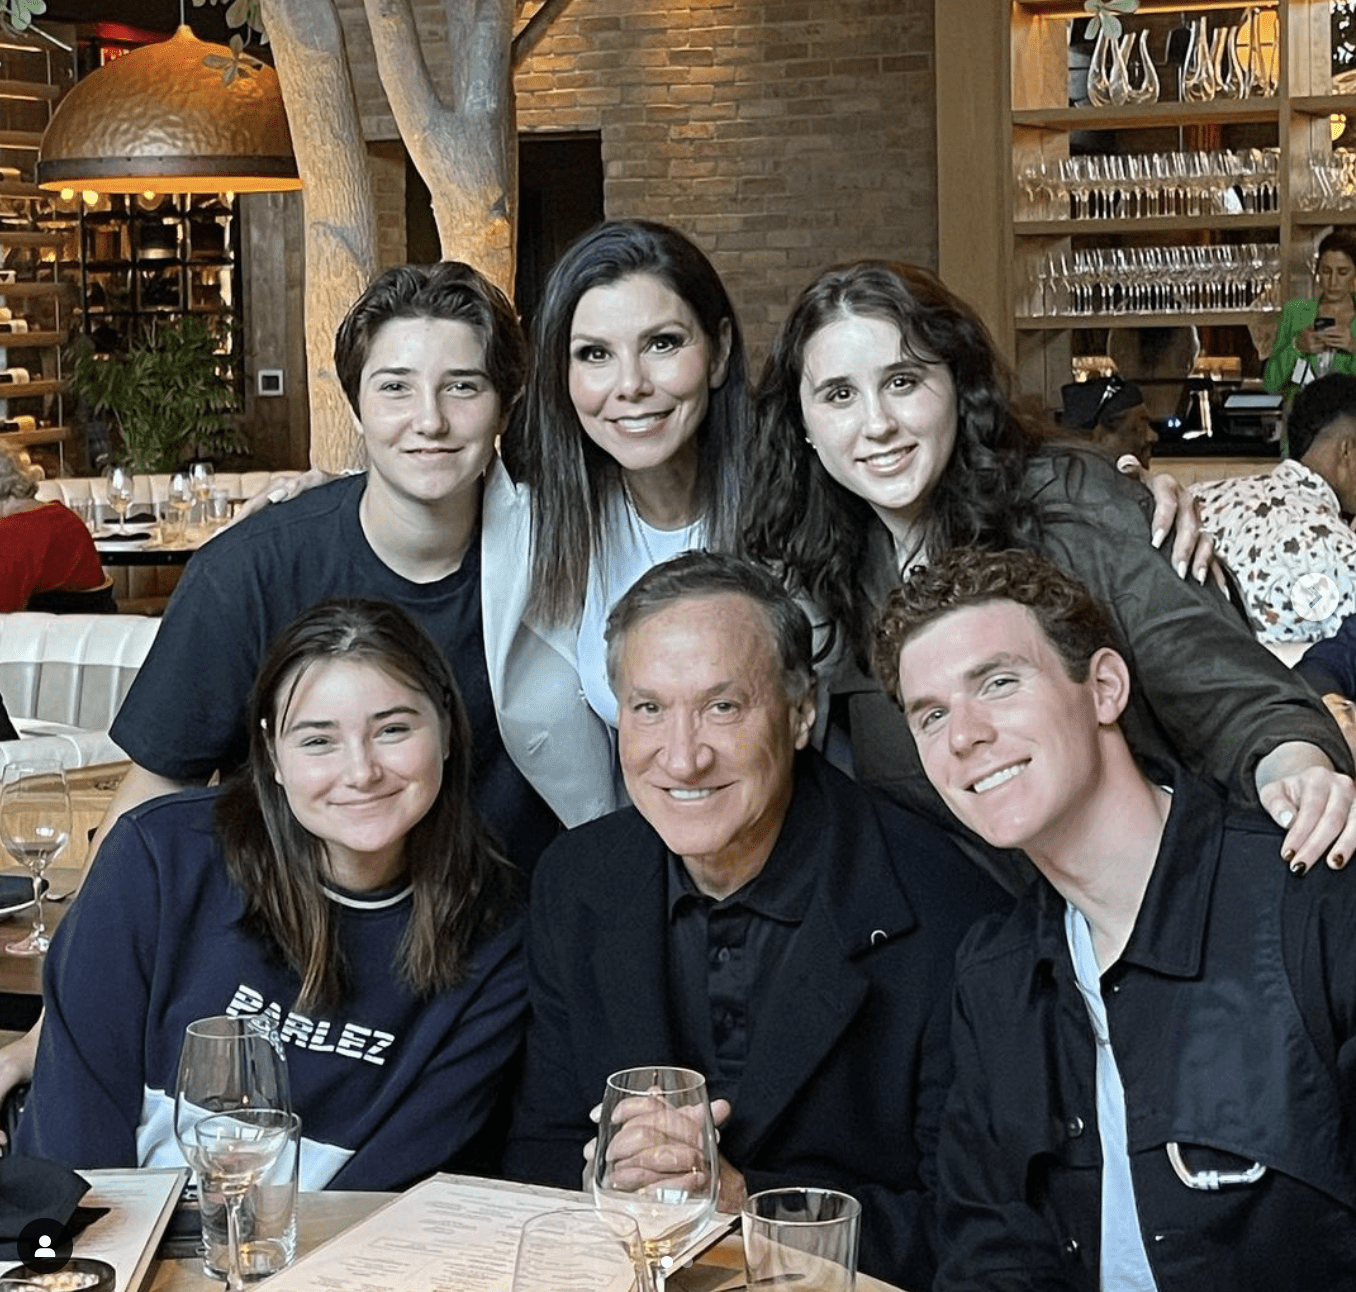 Terry and Heather Dubrow Legally Change Transgender Child’s Name and Gender